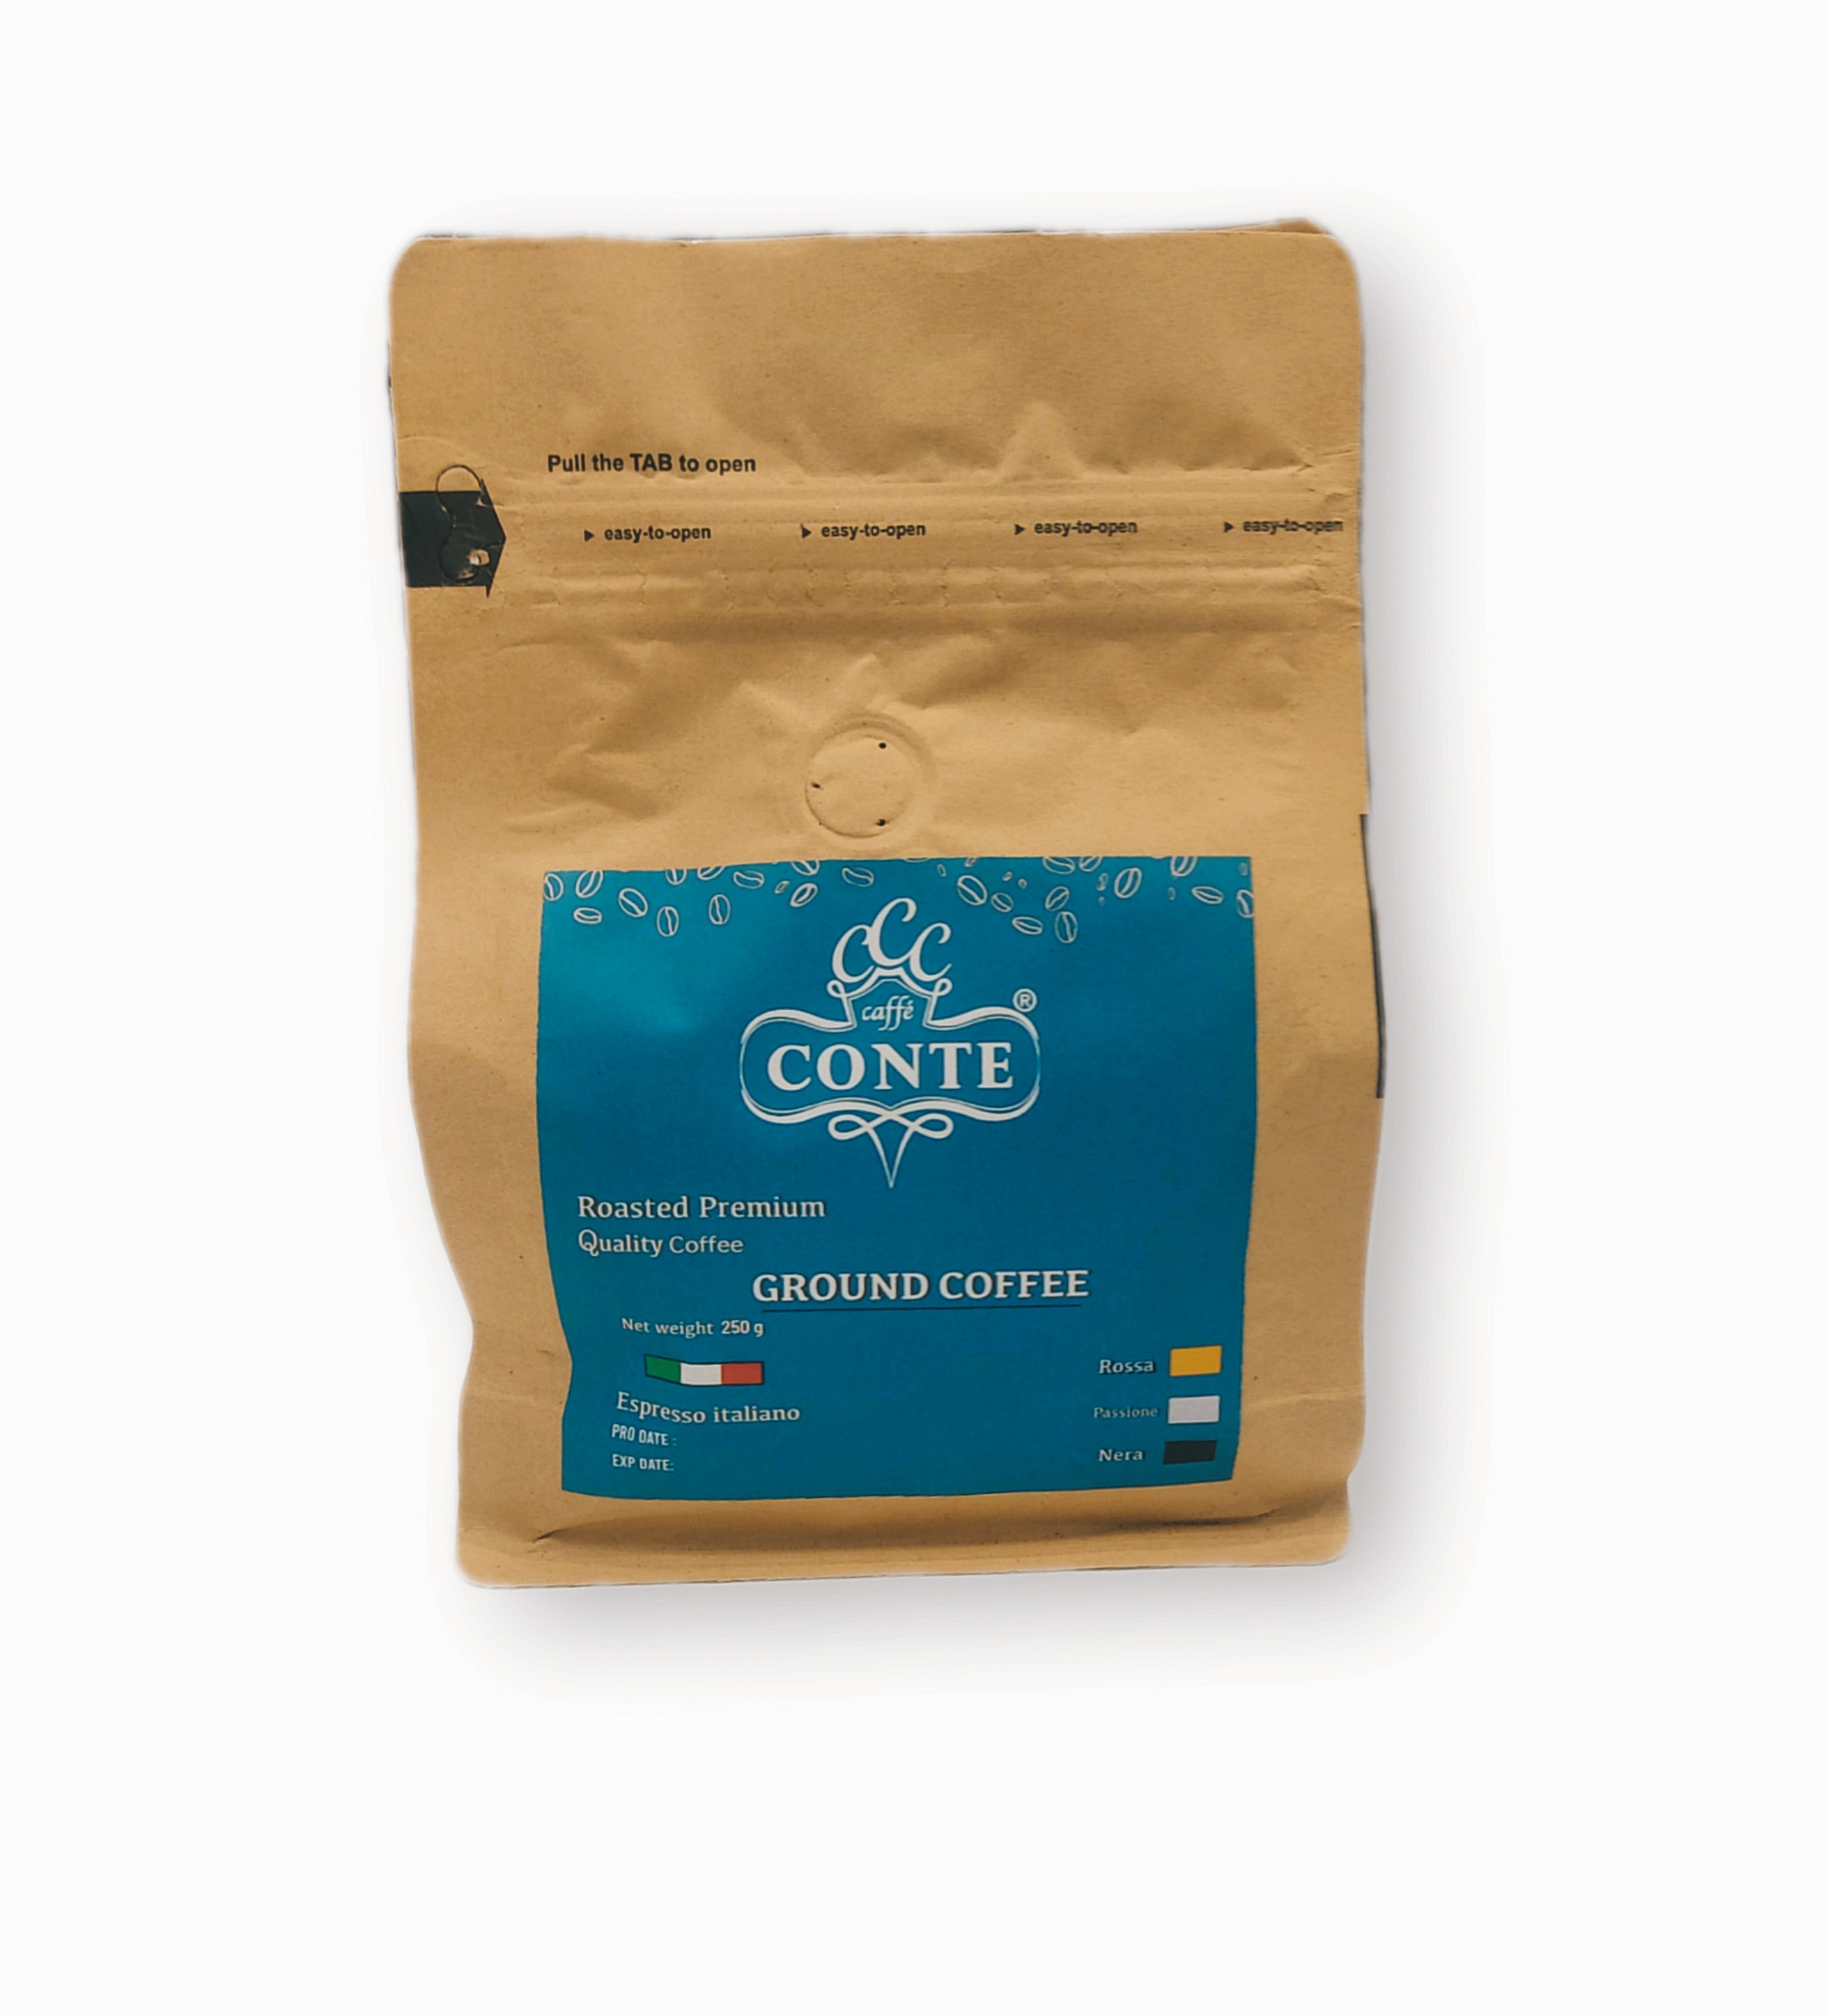 Conte Silver Coffee ( PASSIONE ) - 250g Grounded